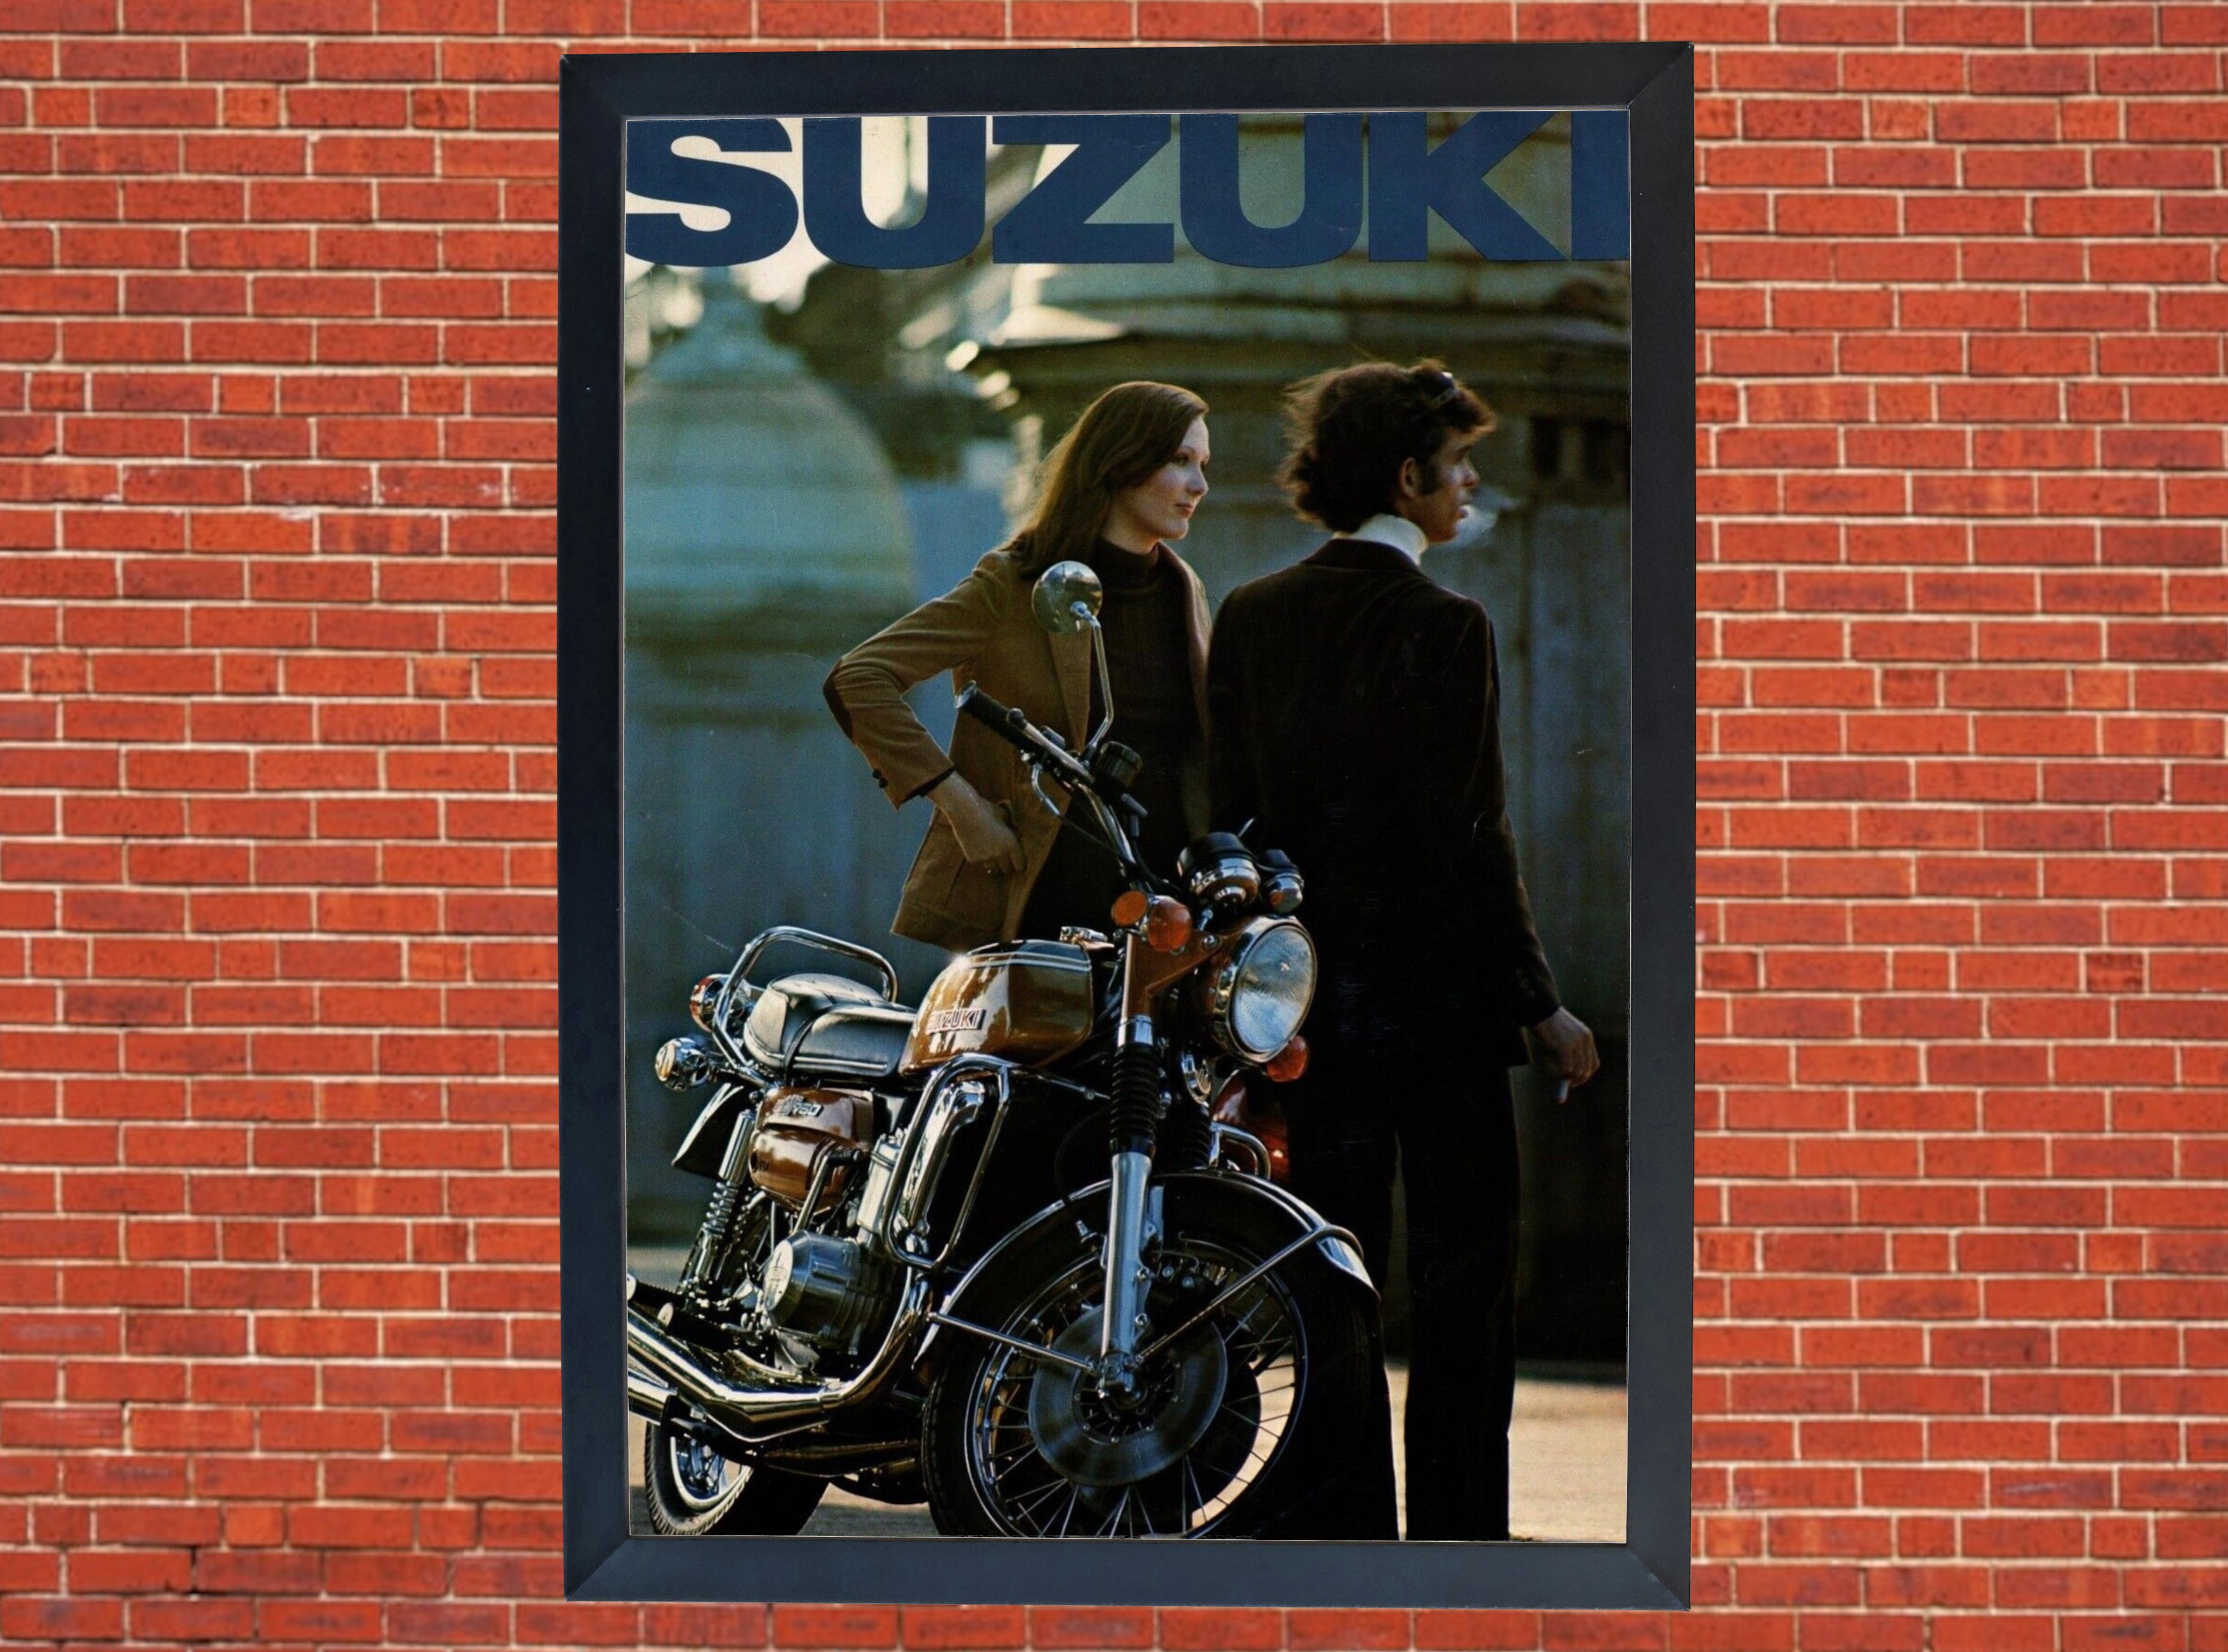 Suzuki GT750 Promotional Motorbike Motorcycle Poster - Size A3/A4